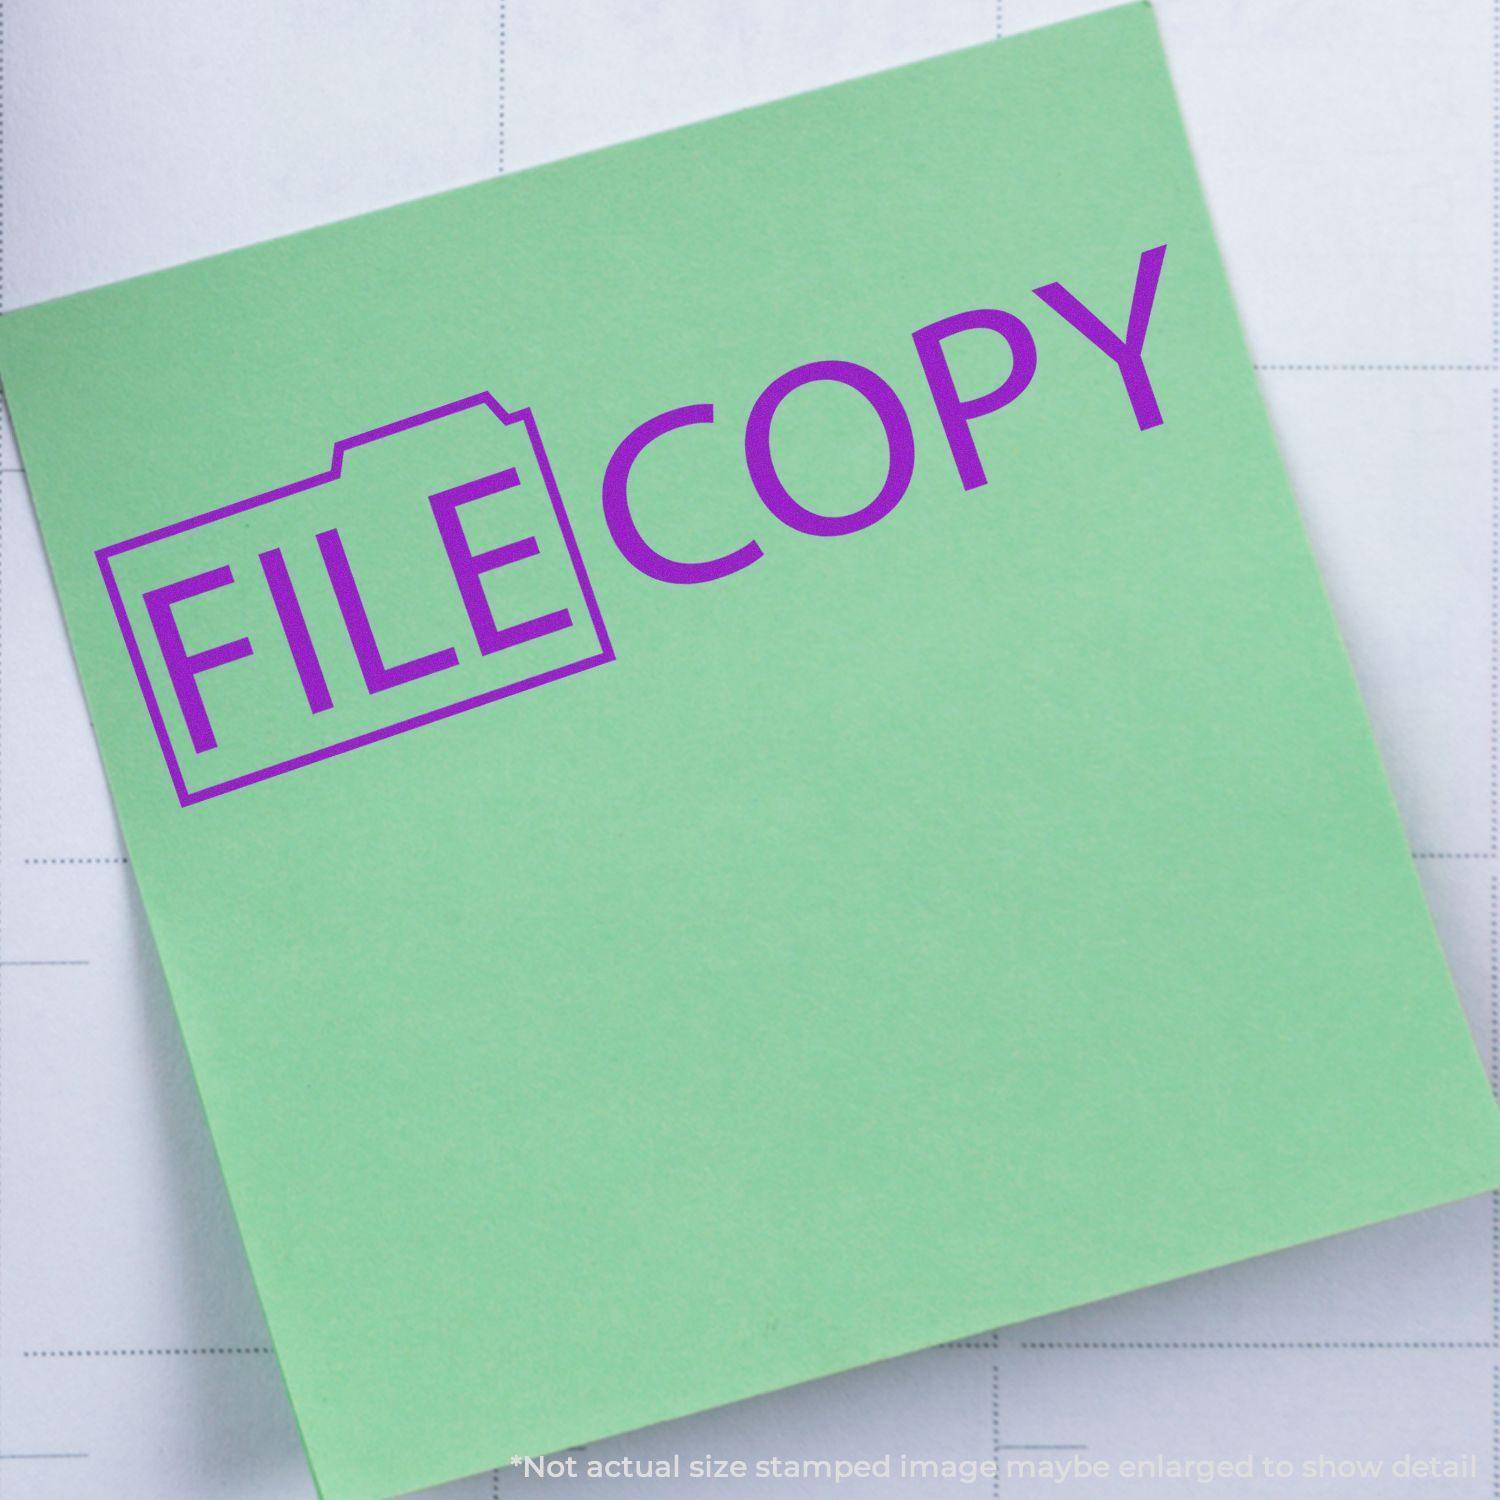 A stock office pre-inked stamp with a stamped image showing how the text "FILE COPY" with an icon of a folder around the word "FILE" is displayed after stamping.